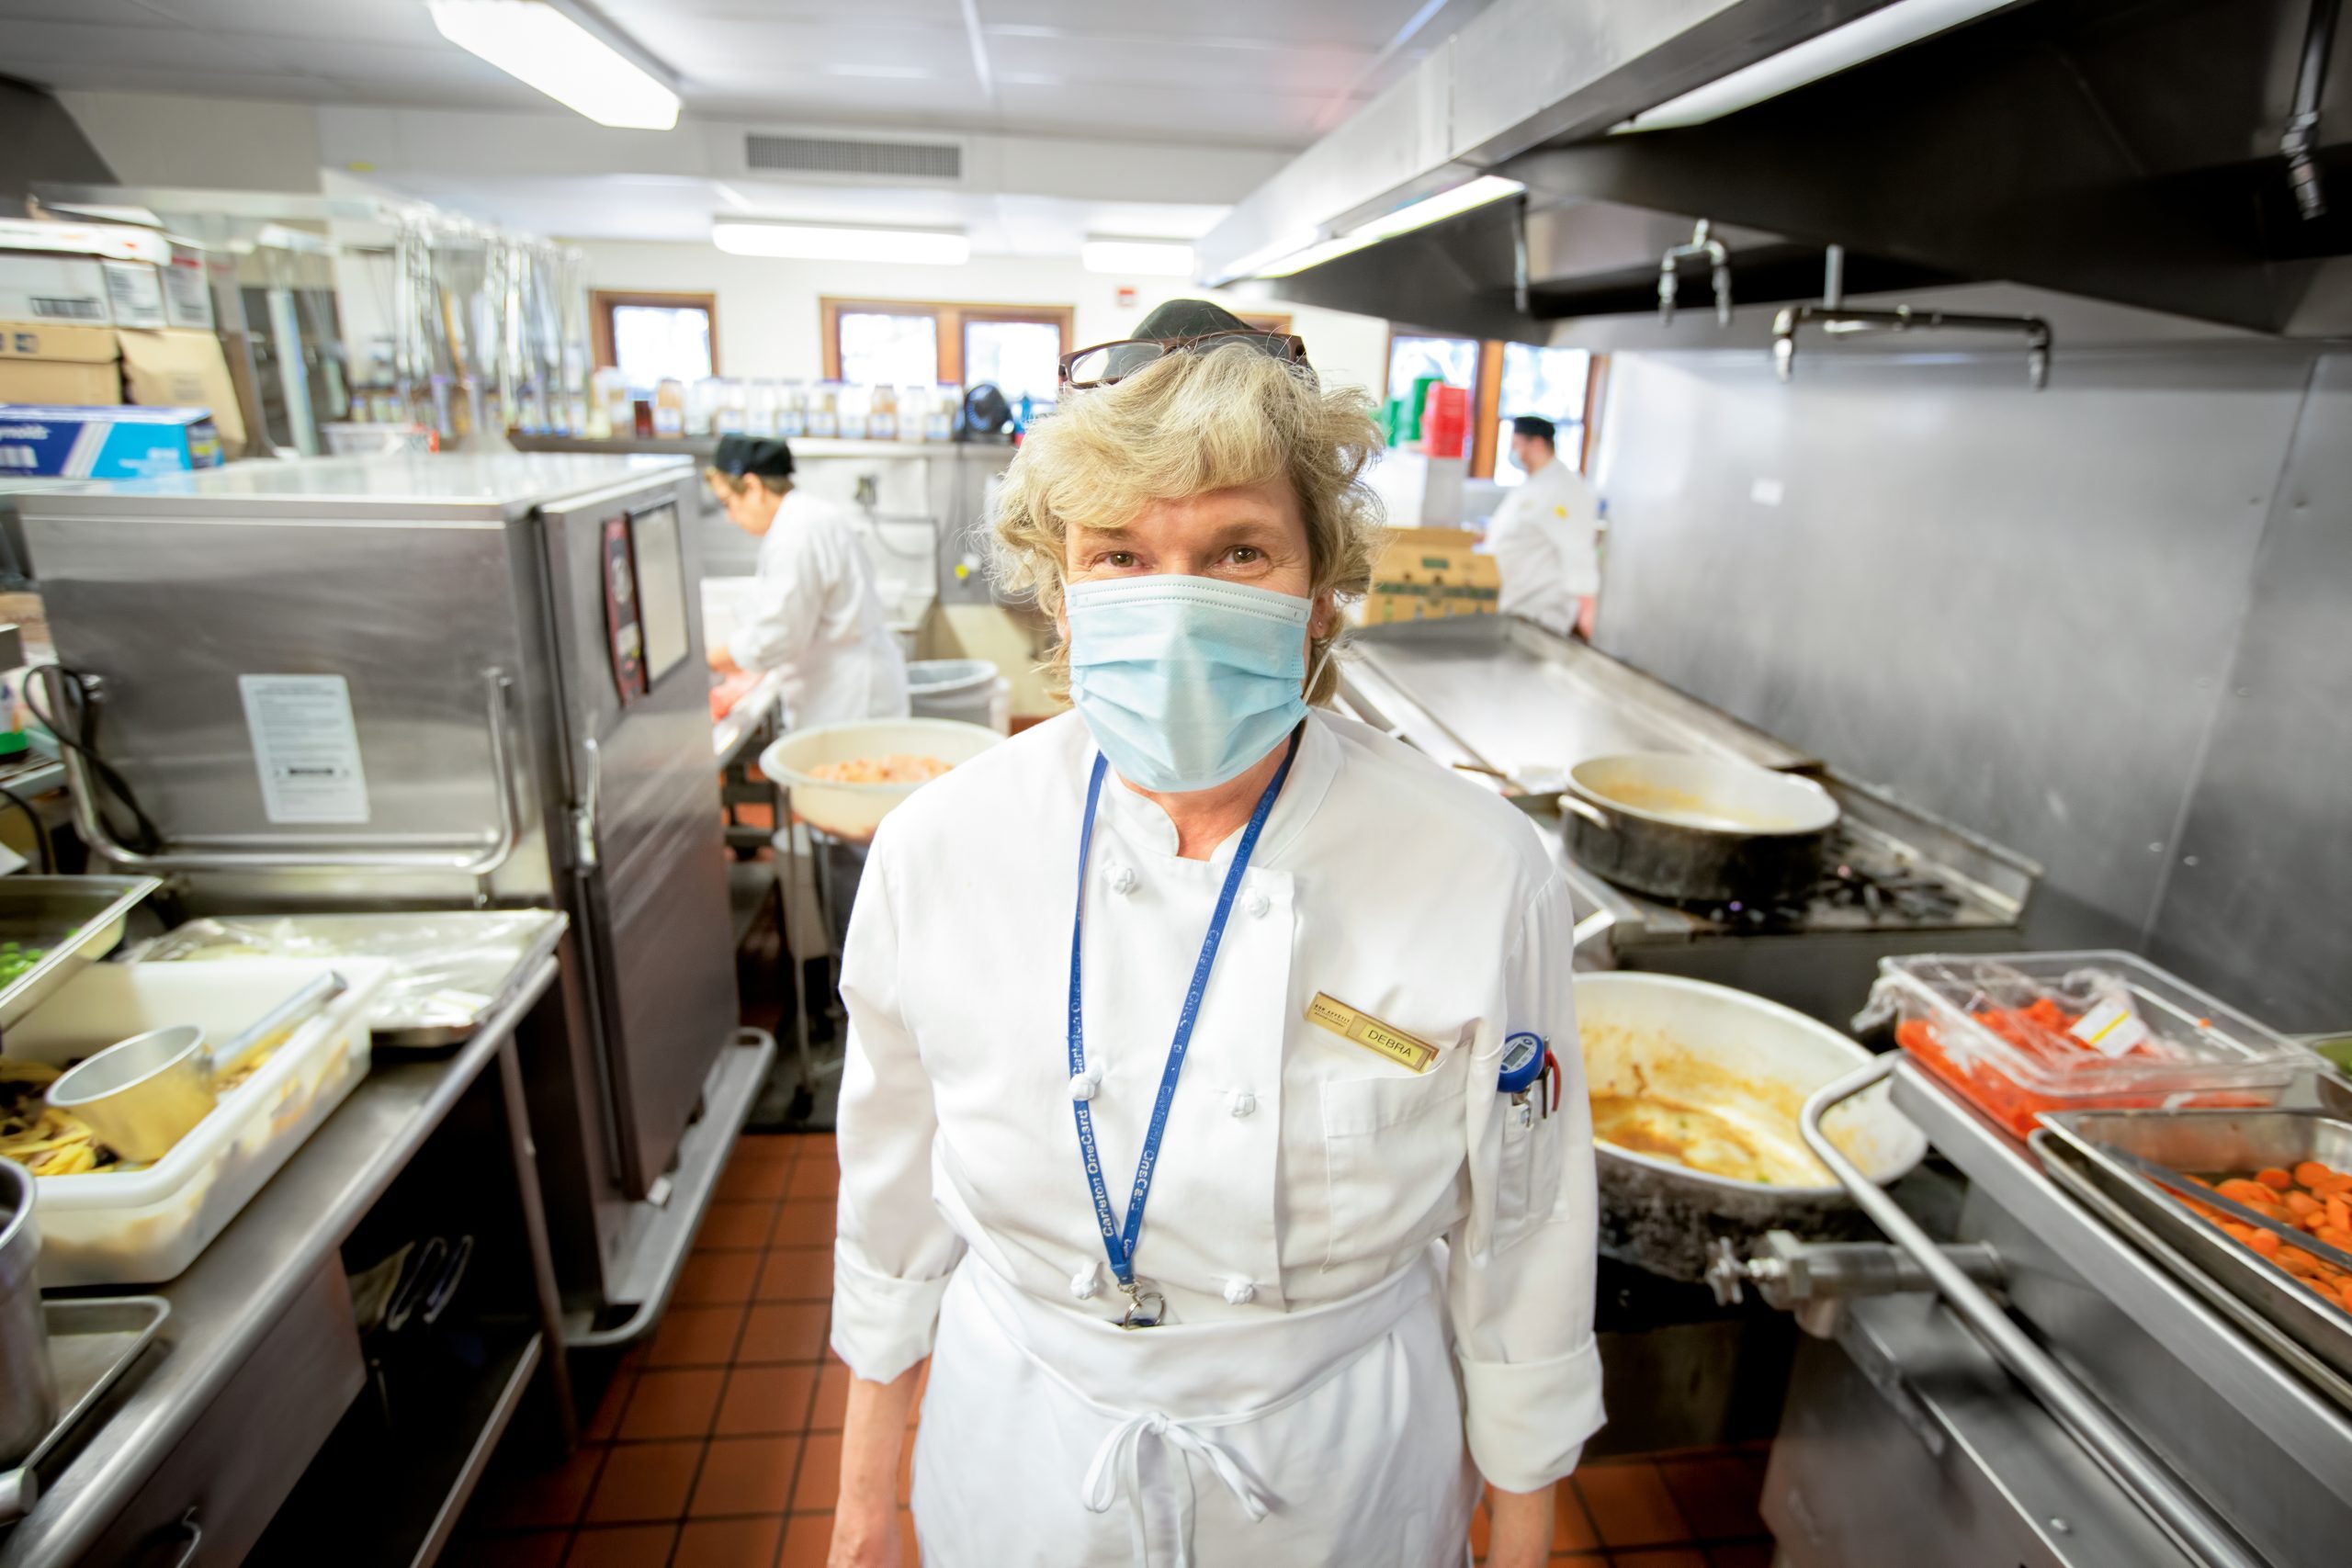 Burton cook Deb Swanson prepares lunch while staying at least six feet away from her colleagues.